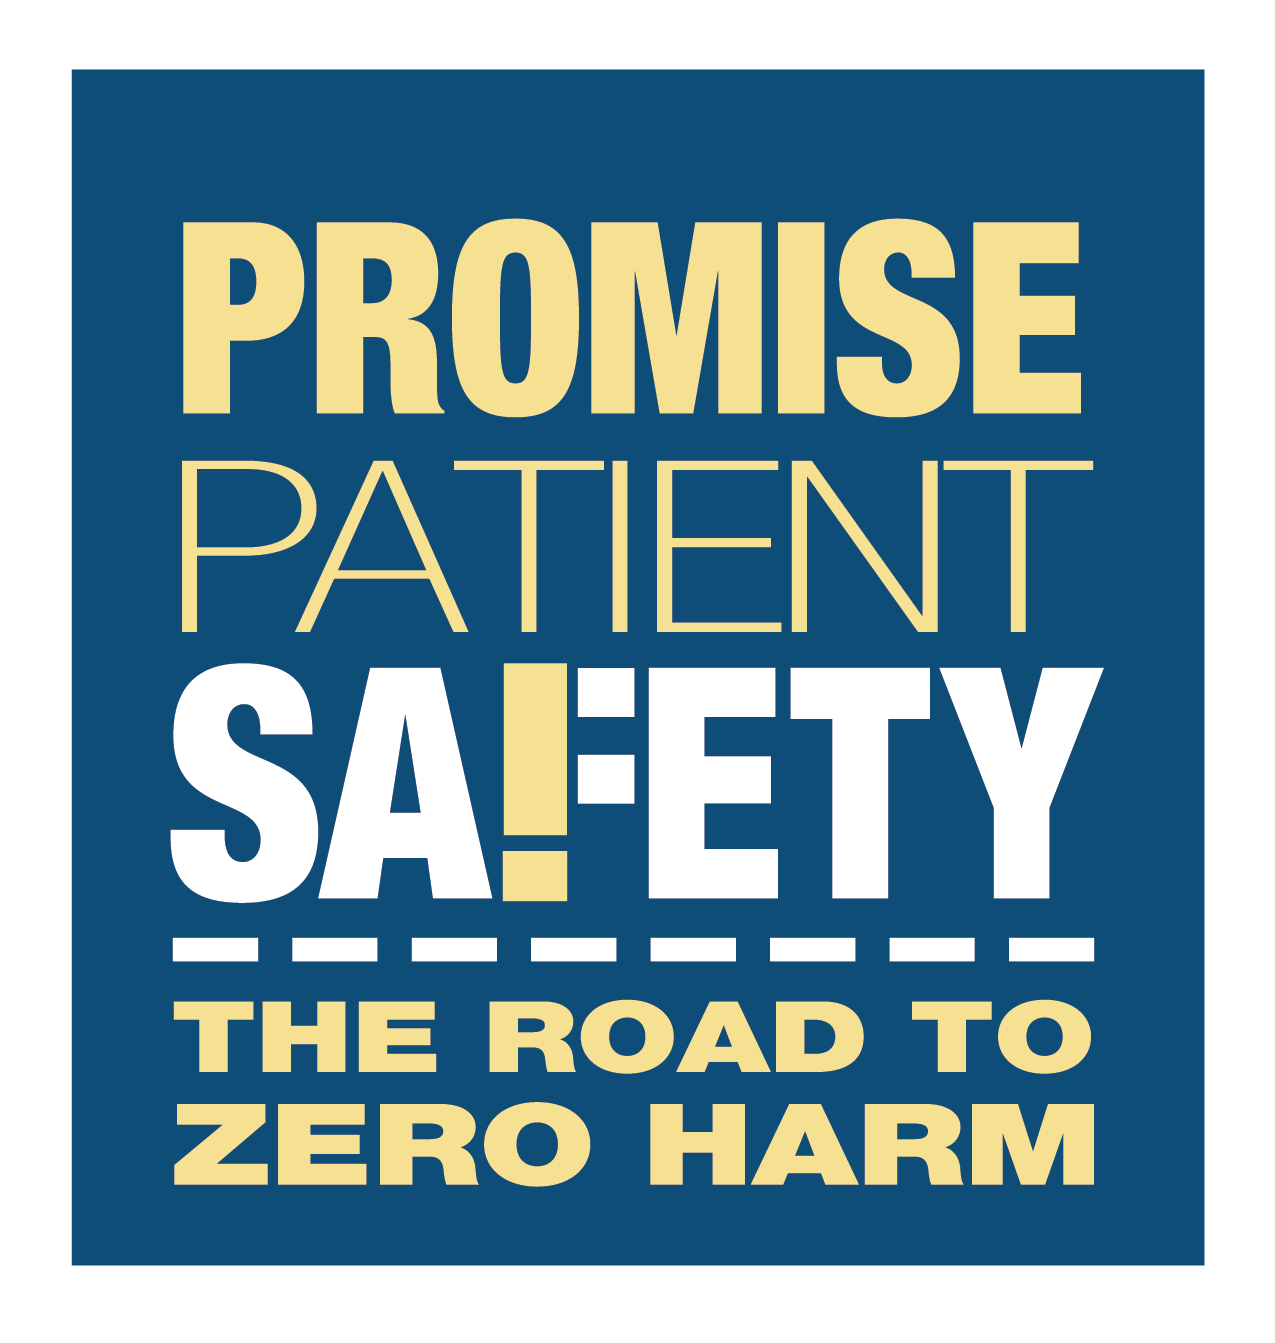 Promise patient safety: the road to zero harm